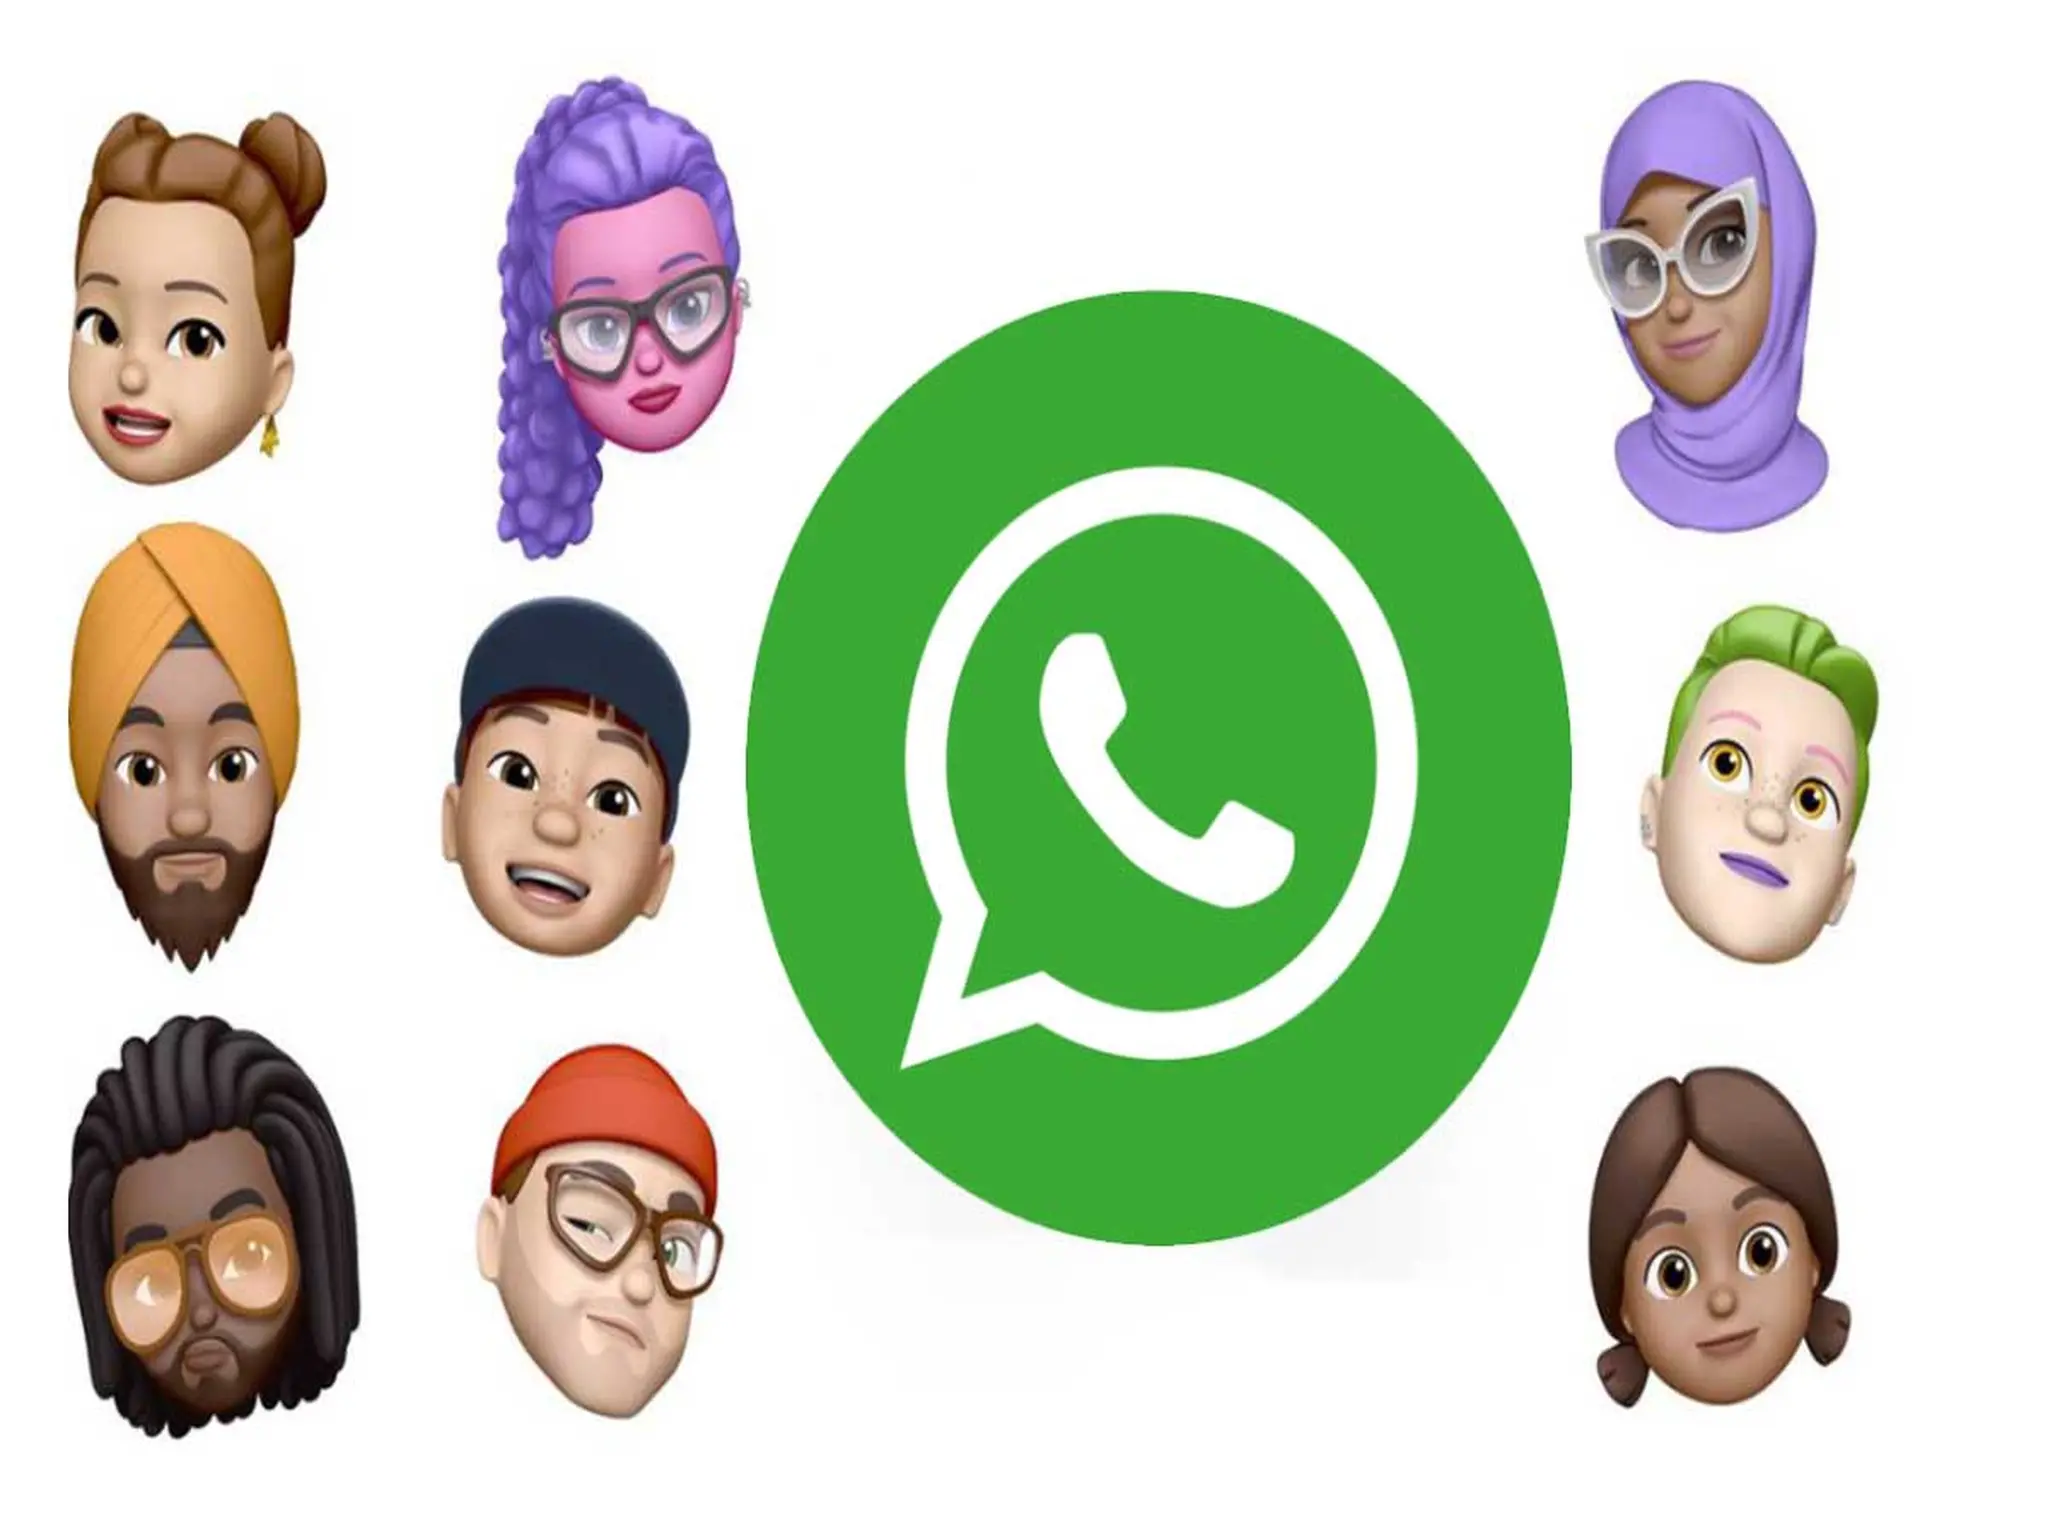 Only these phones can use WhatsApp's artificial intelligence-powered stickers.